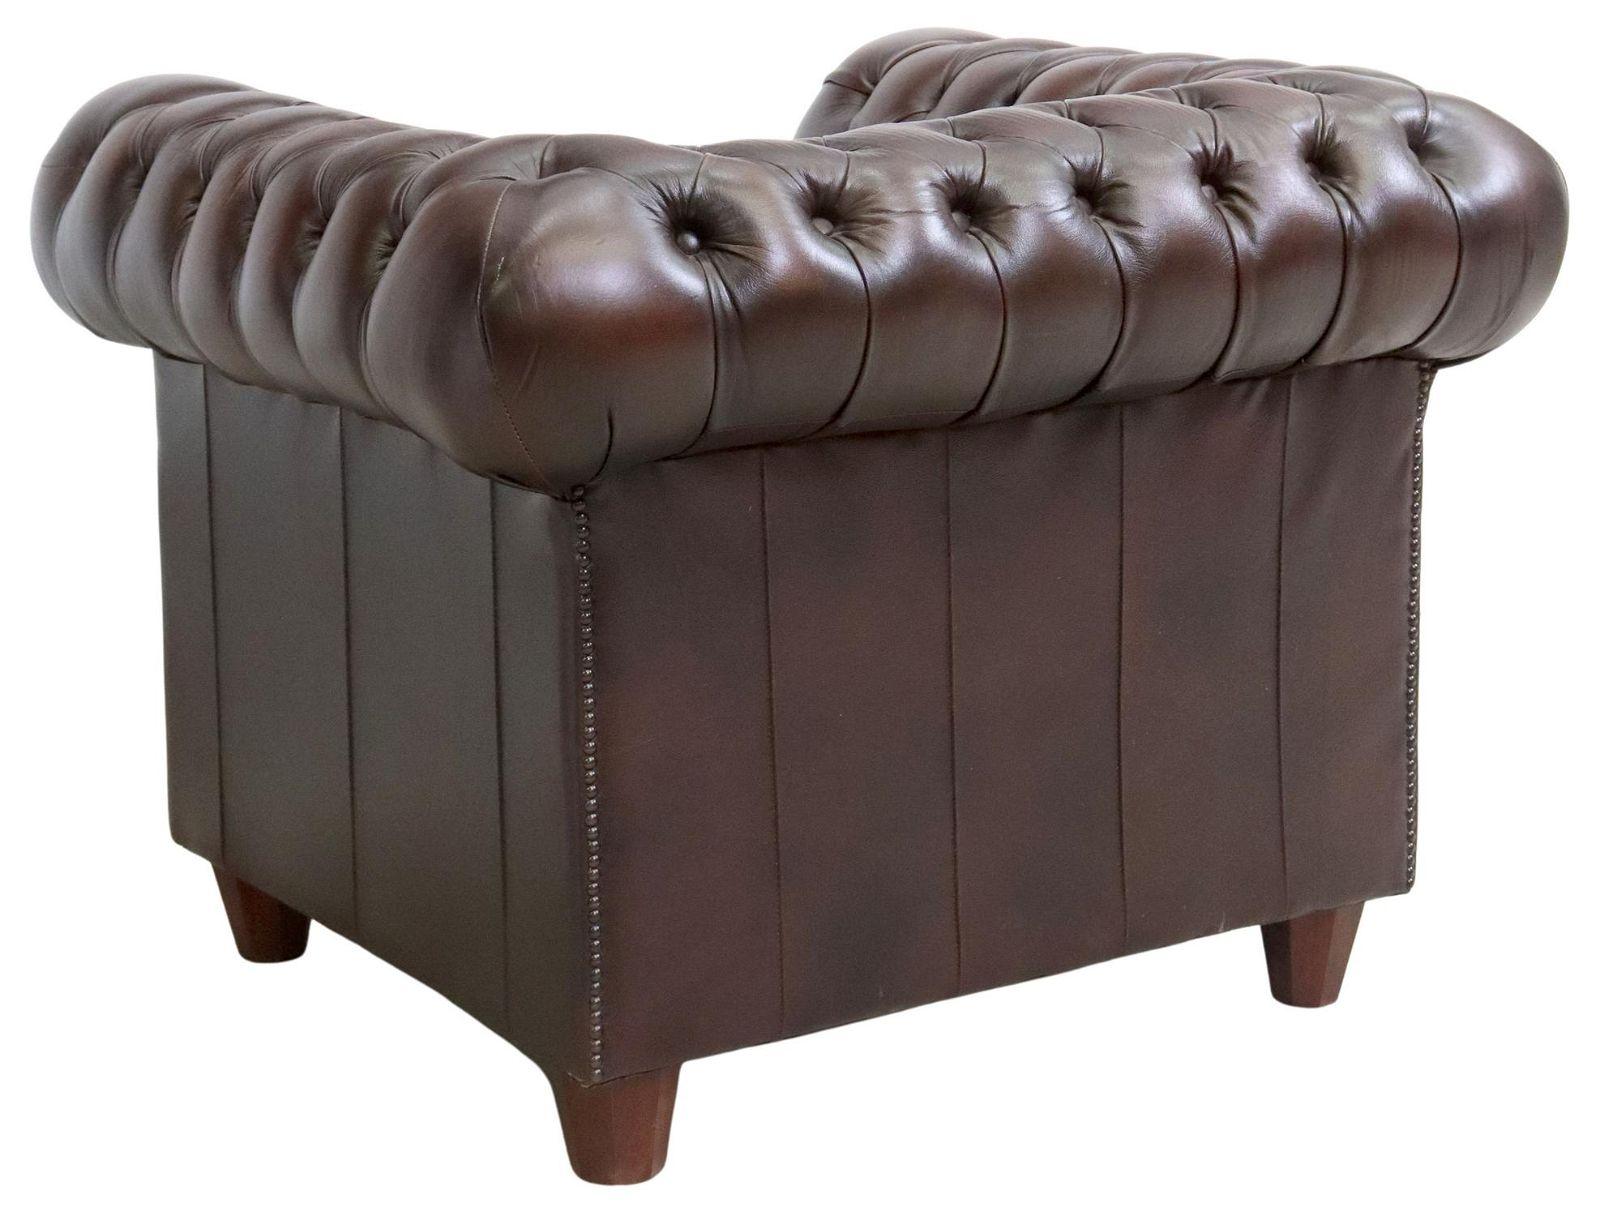 Georgian Vintage English Chesterfield Tufted Leather Club Chair For Sale